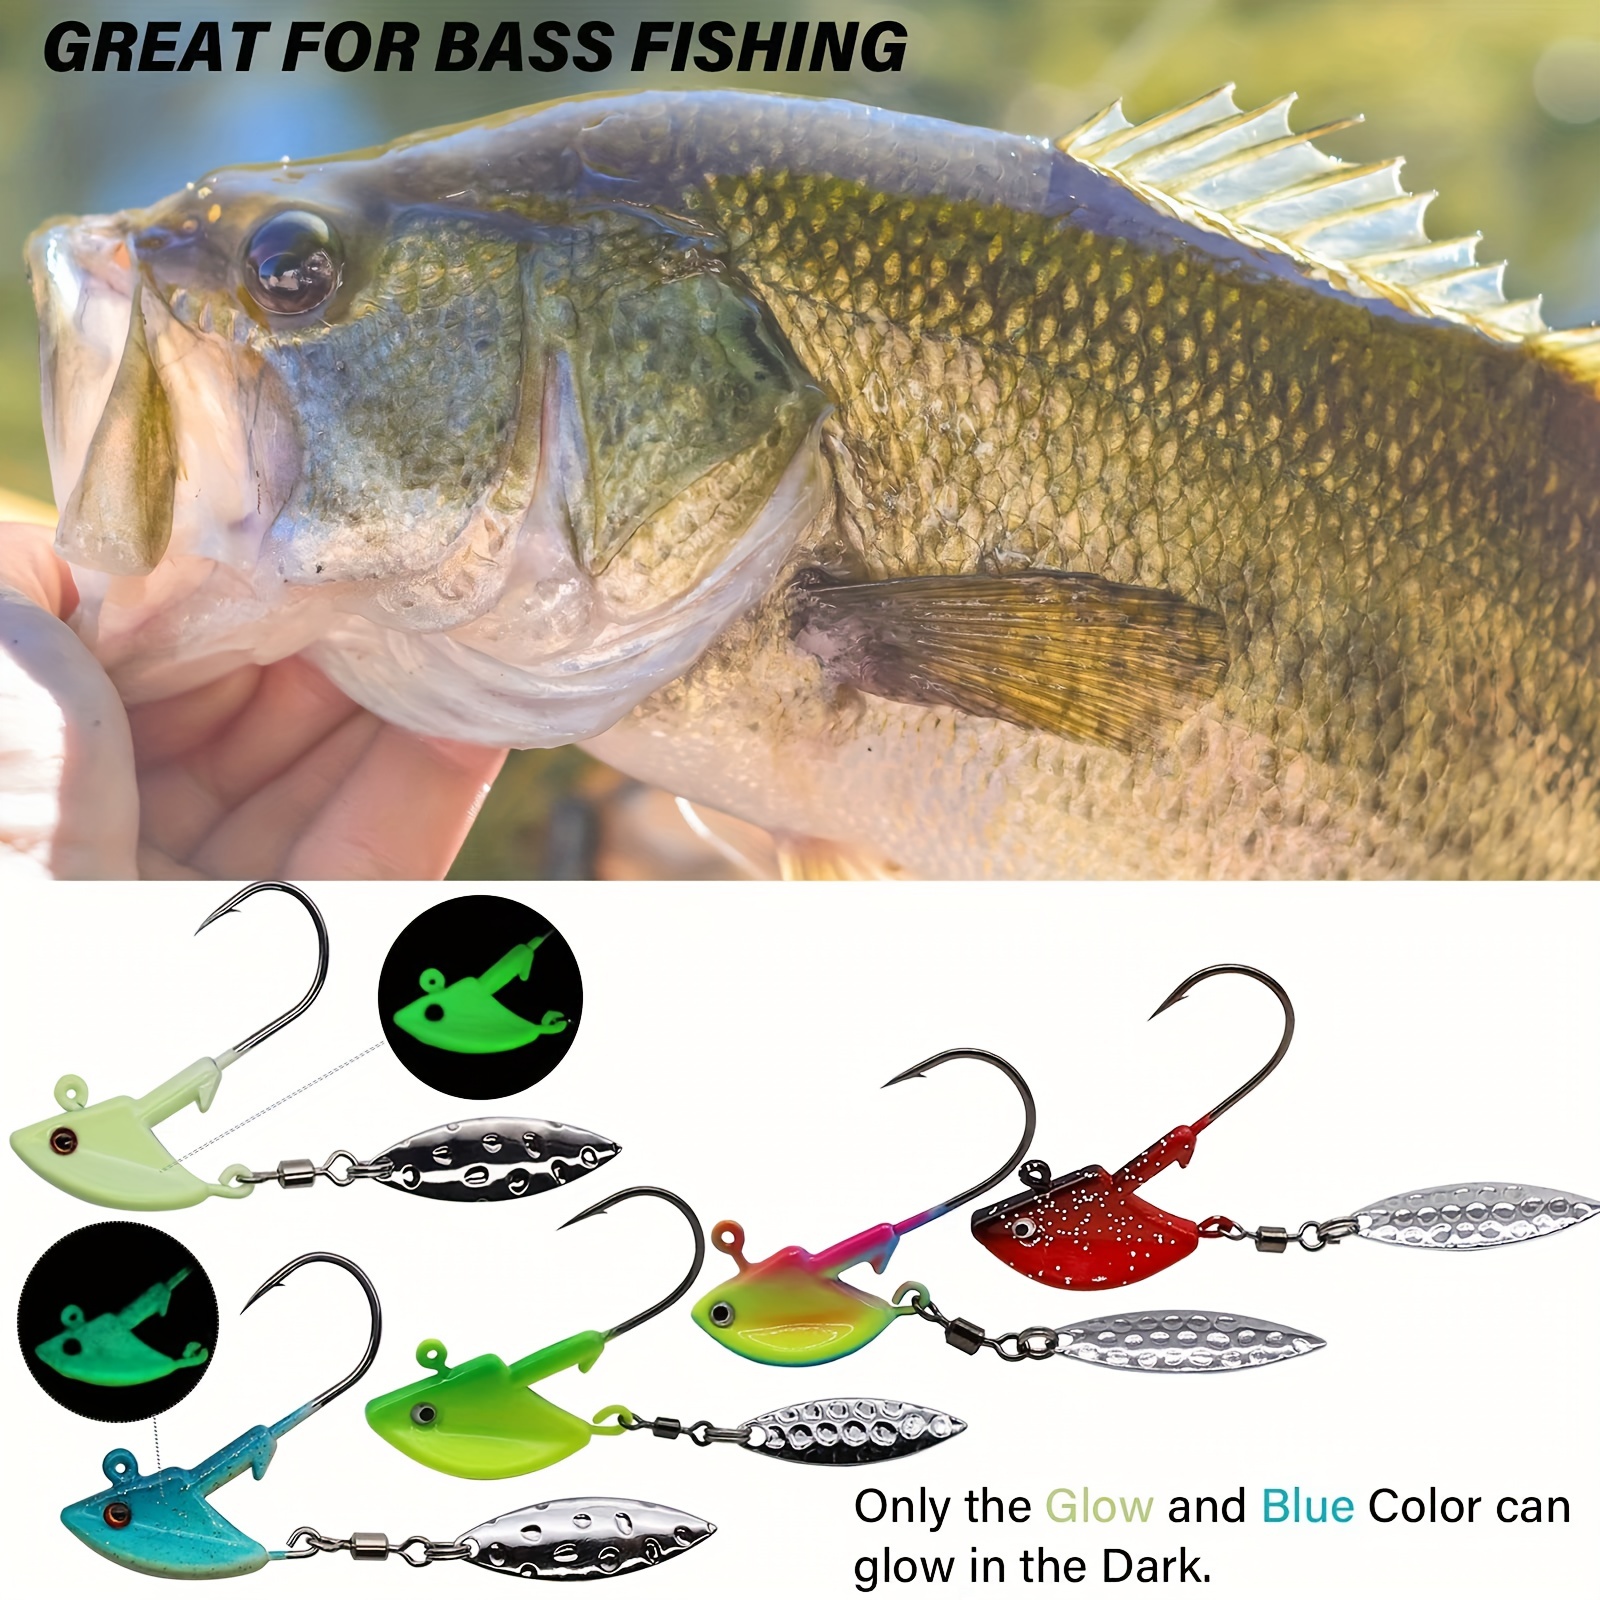 Dovesun Fishing Jig Heads Underspin Jig Heads with Willow Blade